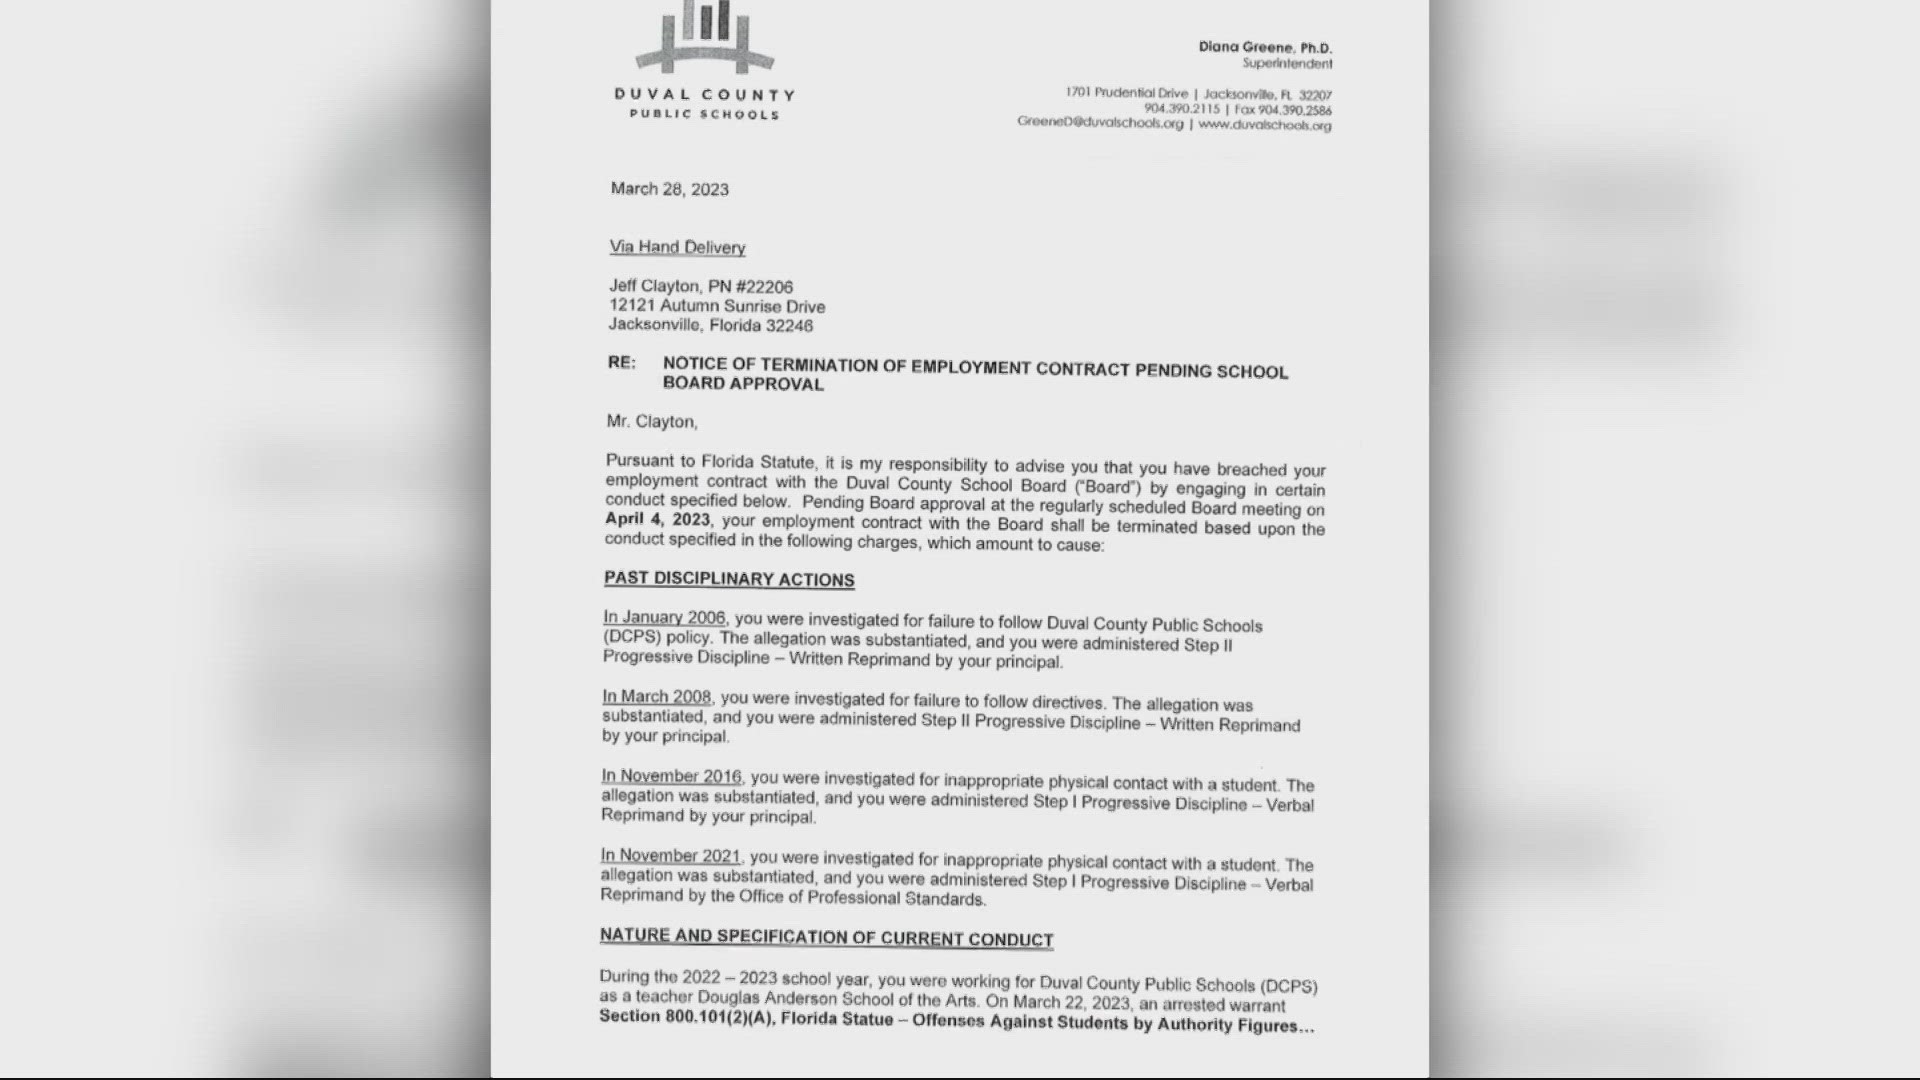 State officials want to know why they can’t find a mandatory DCPS report about Jeffrey Clayton’s inappropriate conduct with a student.